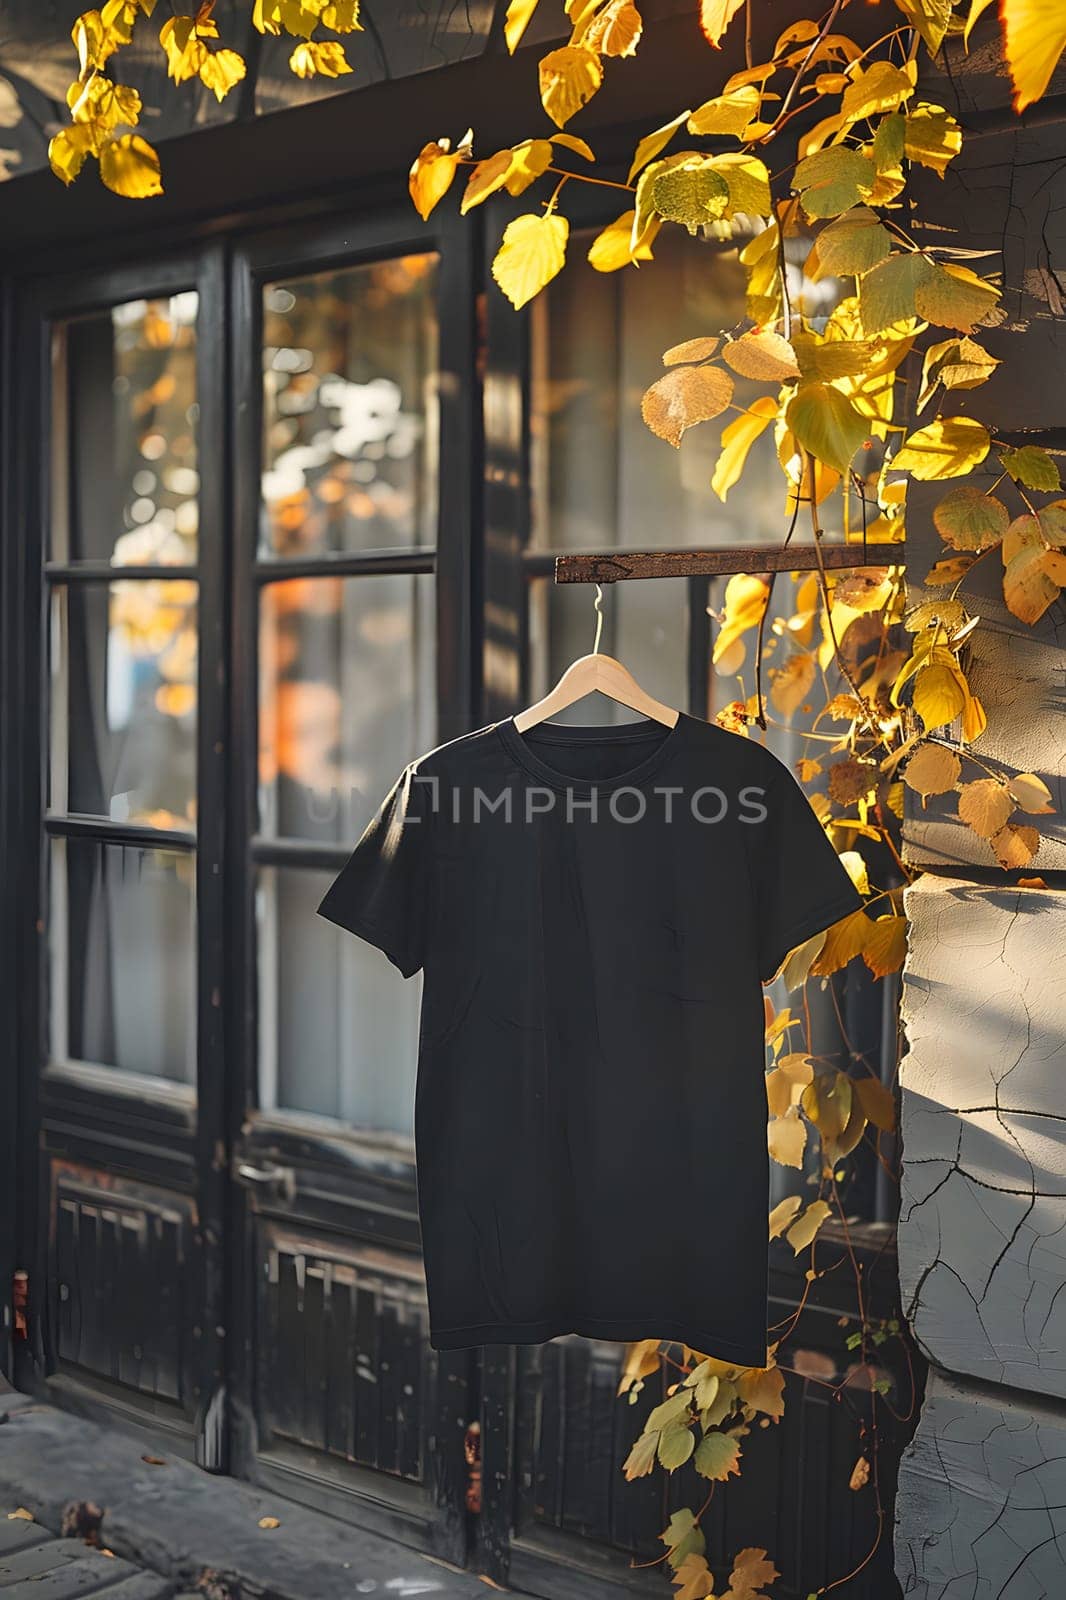 A black tshirt hangs on a hanger in front of a window in a building, with a yellow plant on a twig outside. The window tints and shades the sunlight, casting a shadow on the road surface